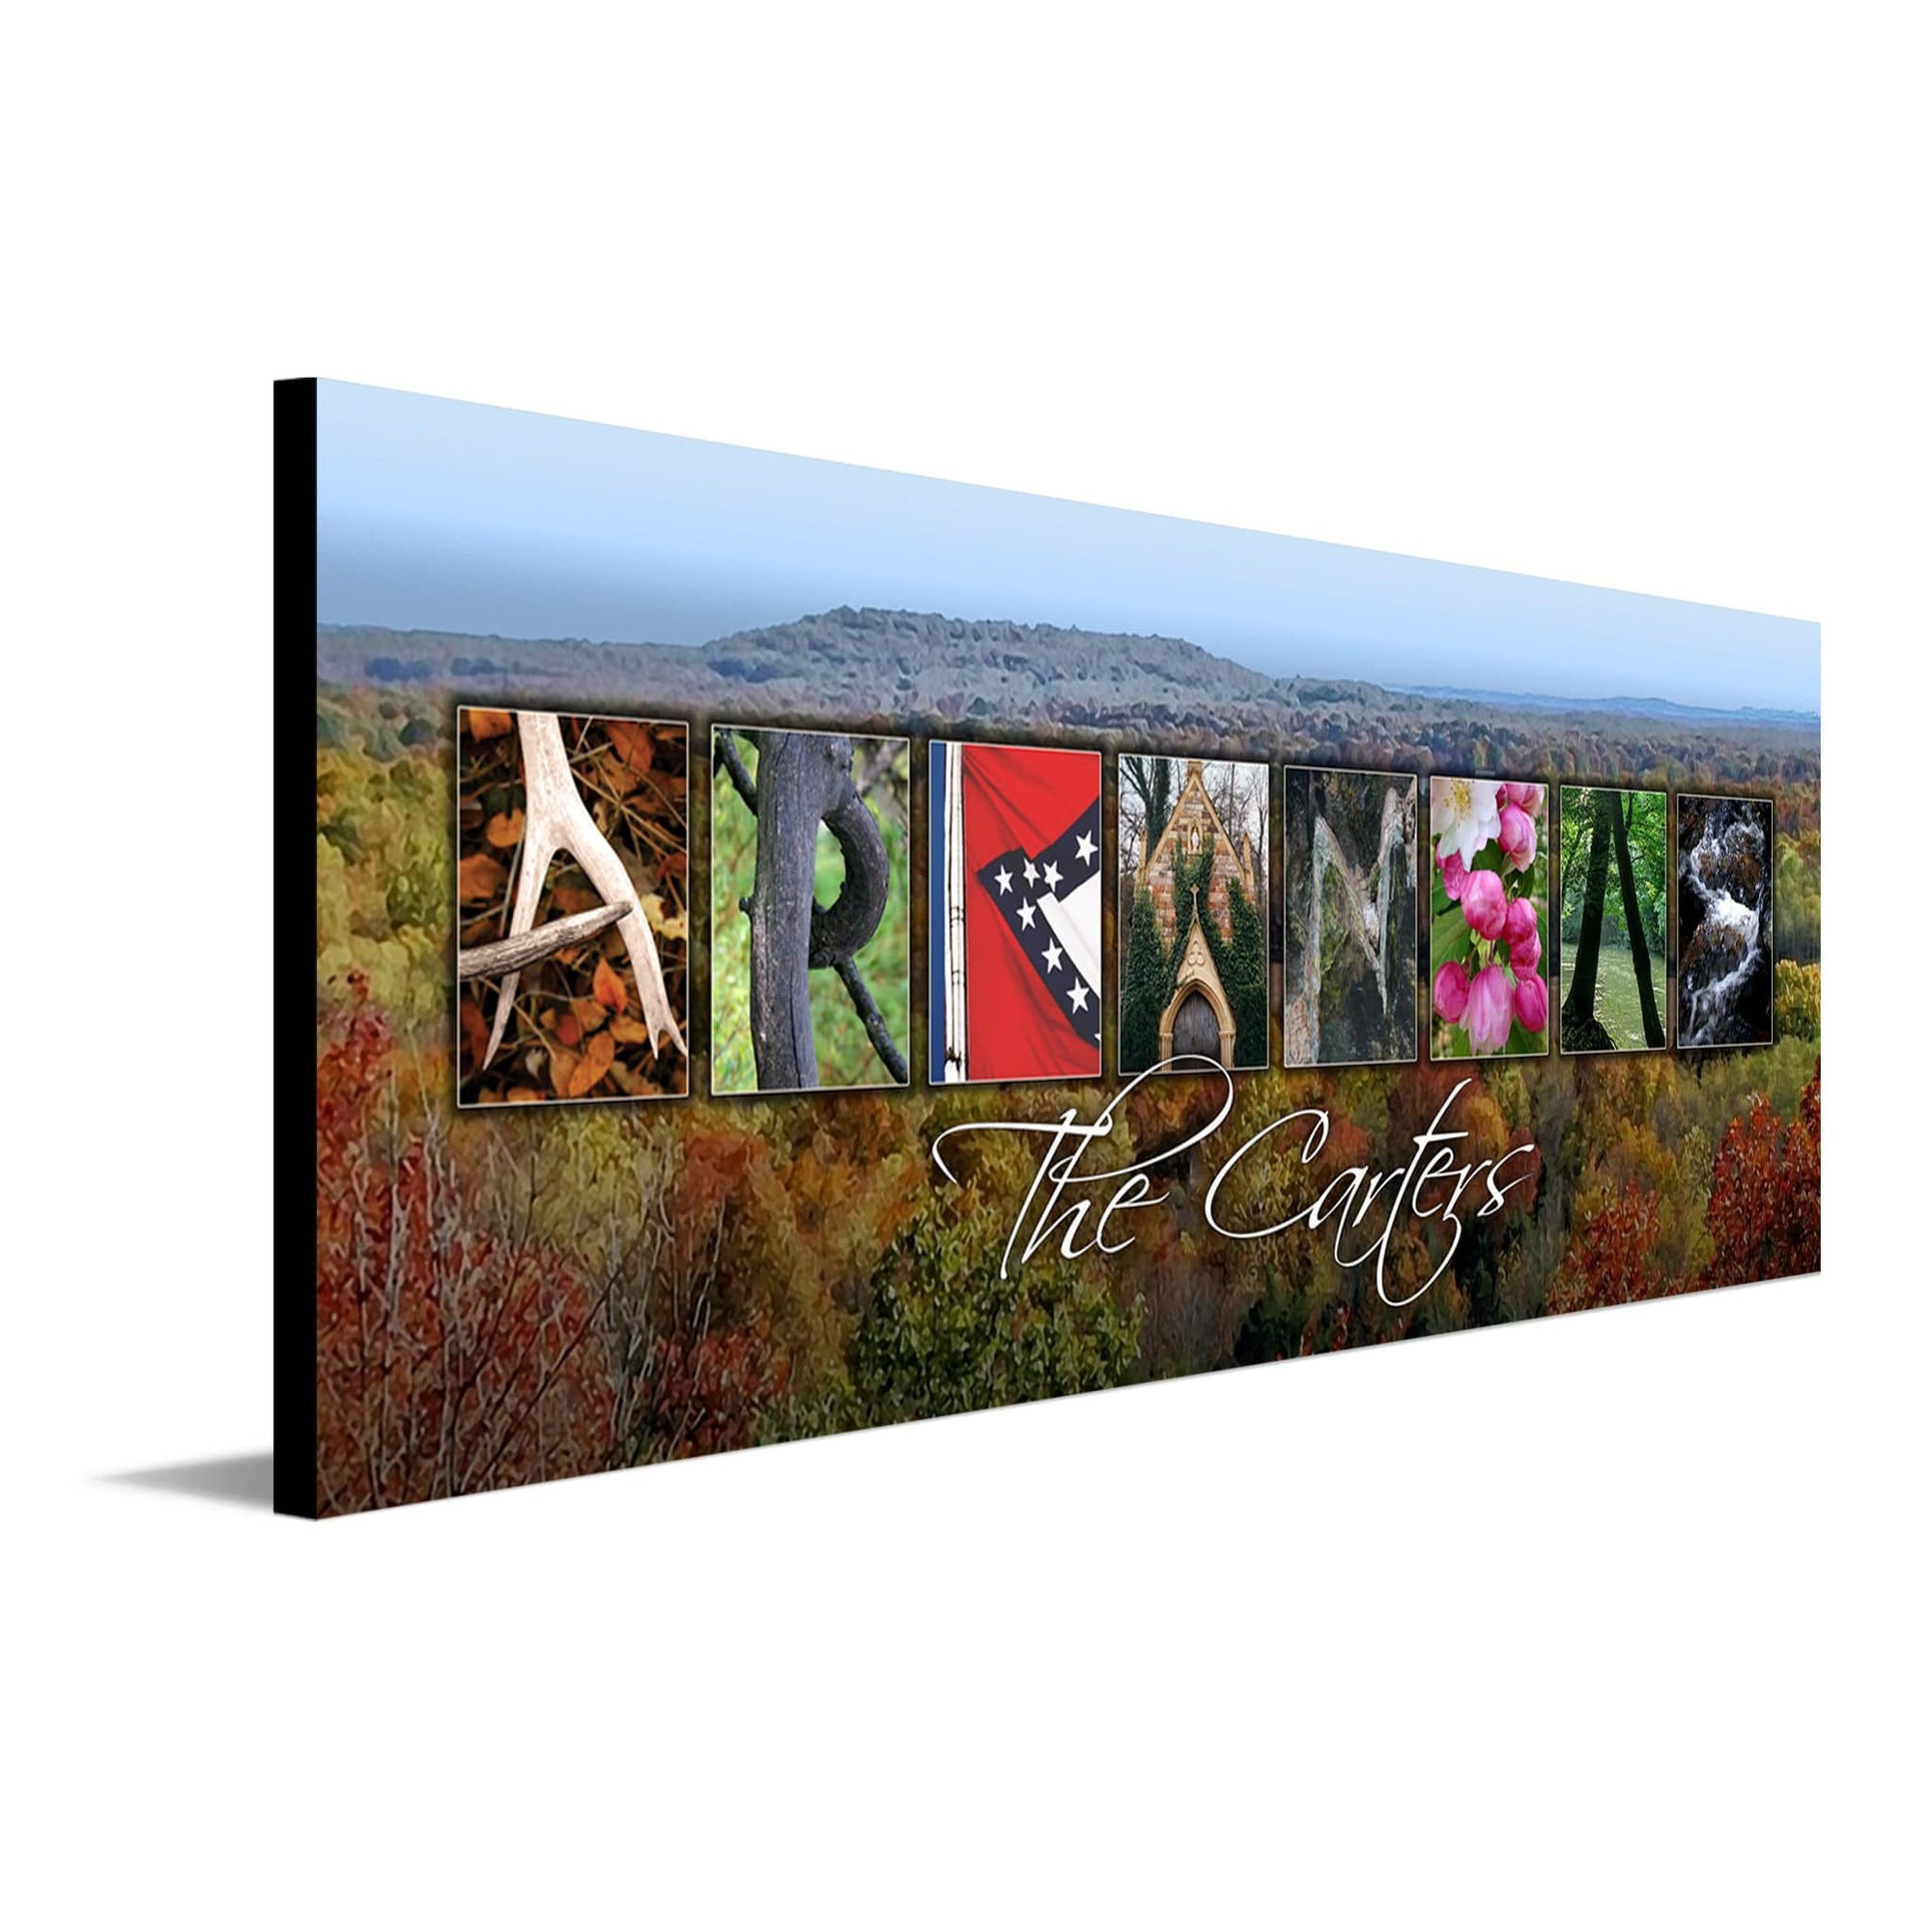 Personalized Arkansas art using images to spell the word Arkansas - Personal-Prints